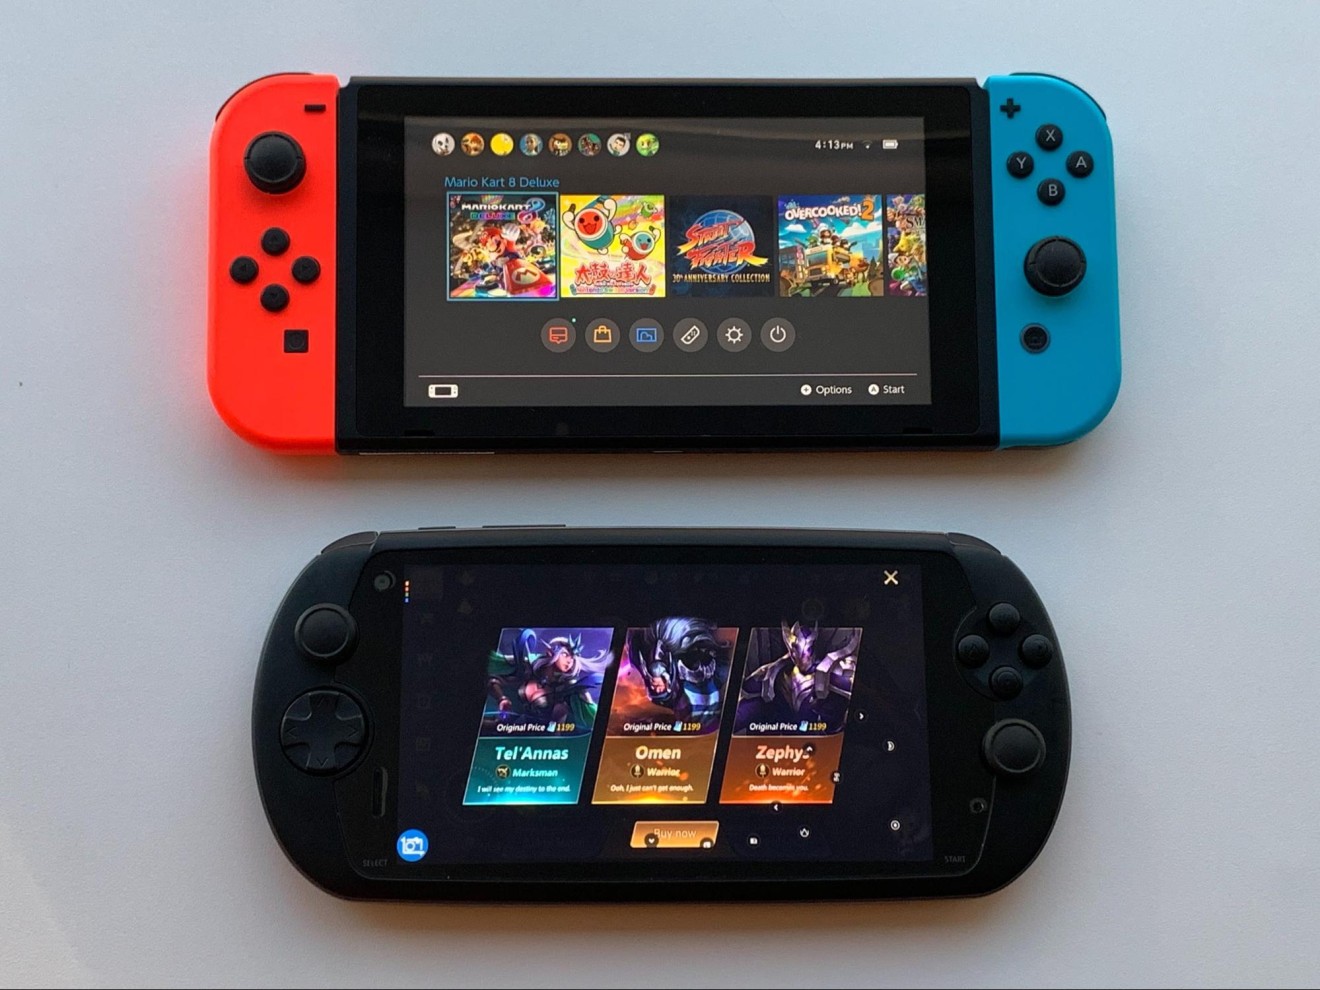 The MOQI i7s is a little smaller than a Nintendo Switch and it looks quite a bit like the Sony PS Vita. (Picture: Thomas Leung/Abacus)